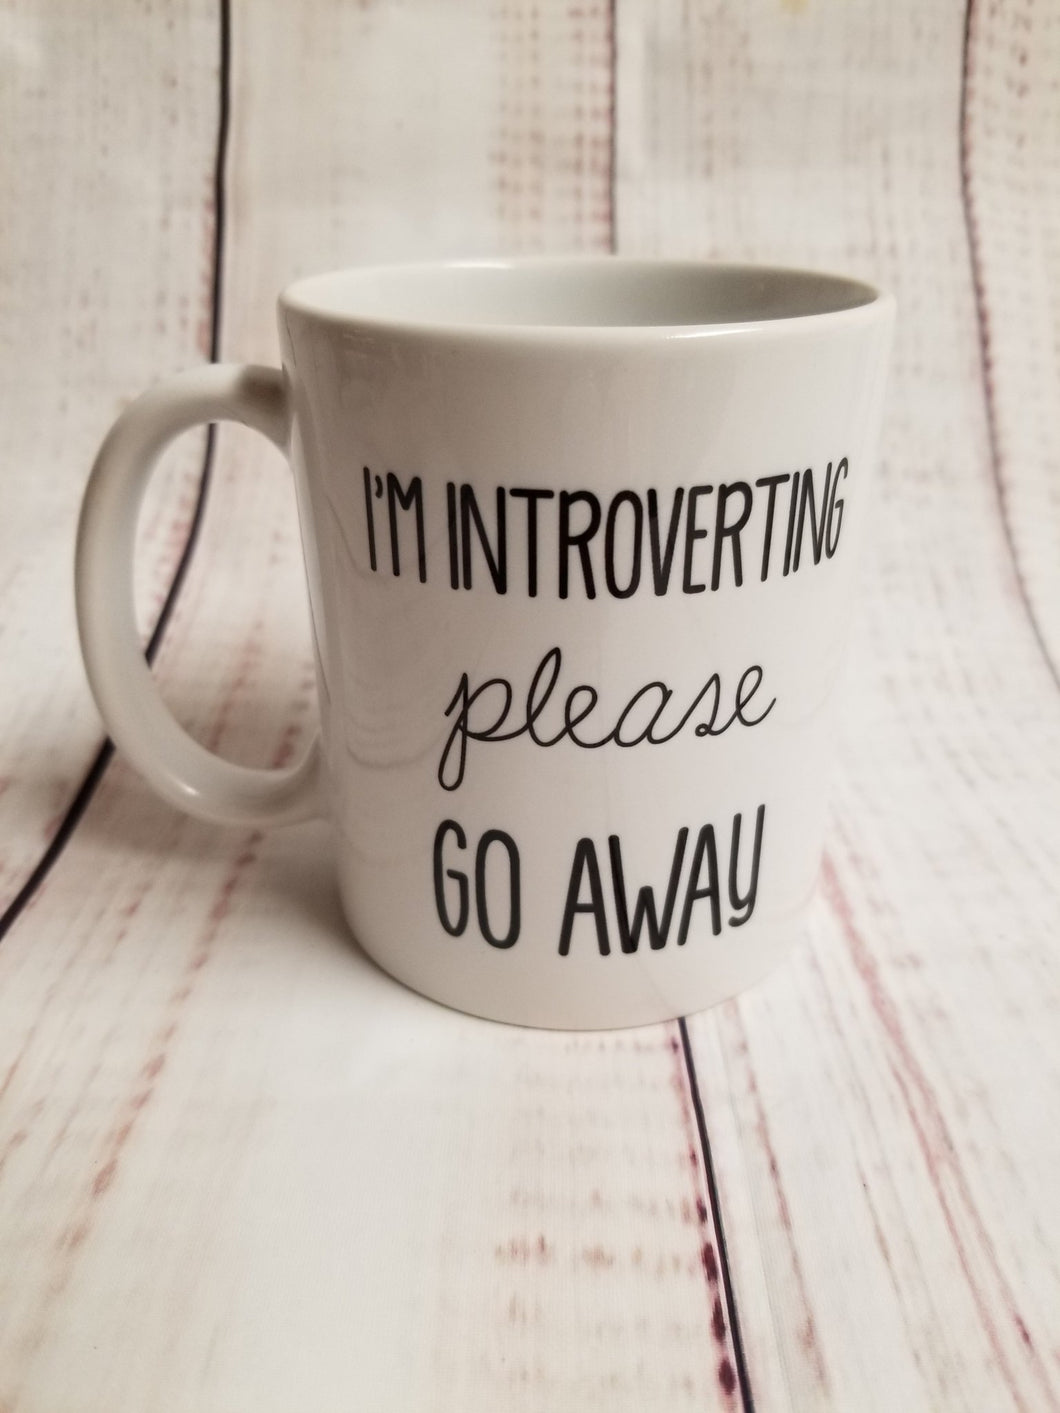 I'm introverting please go away mug - My Other Child / Blooms n' Rooms